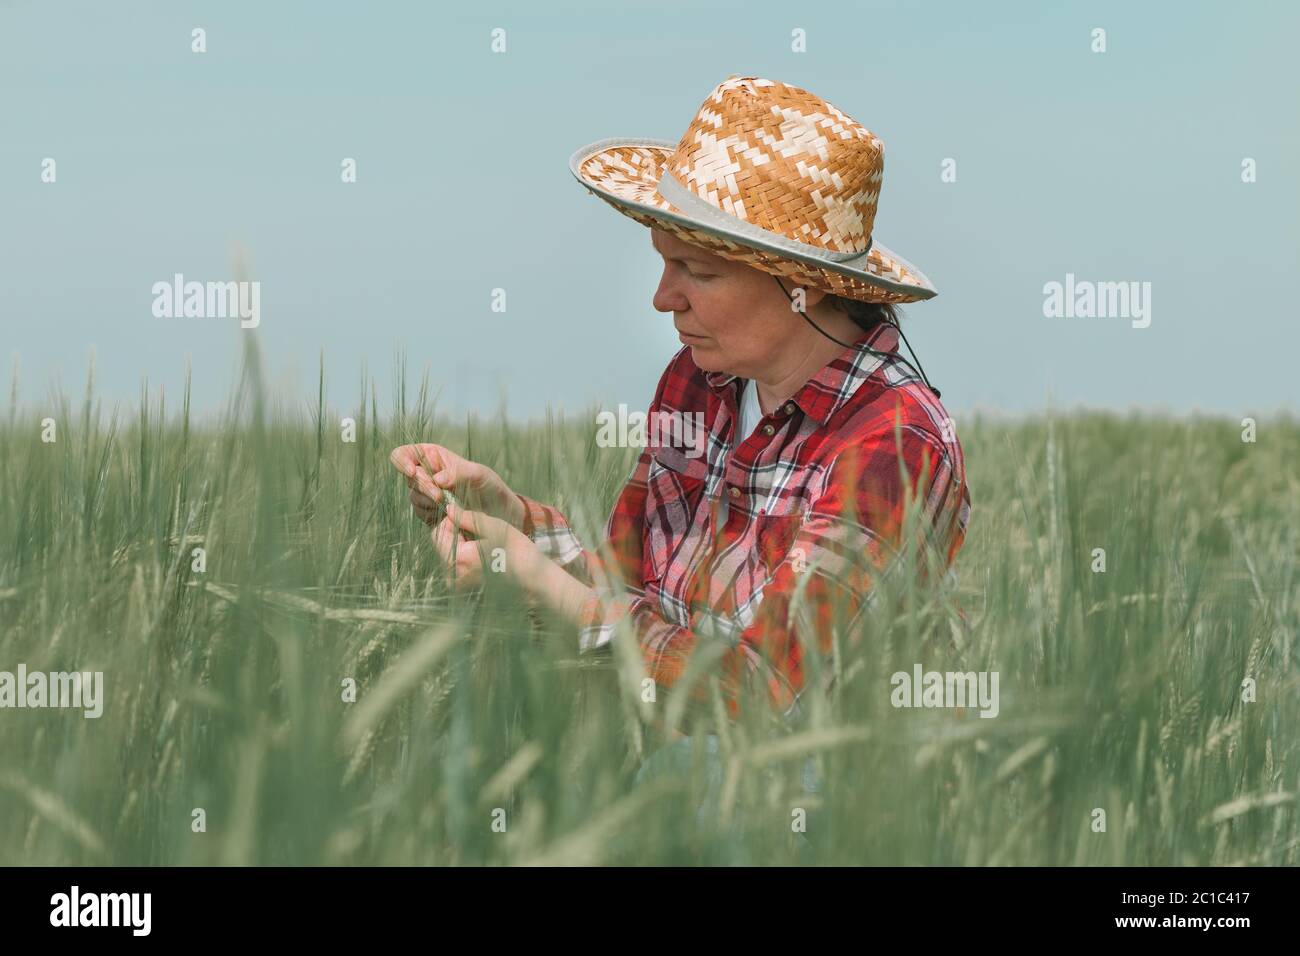 Female agronomist farmer examining development of green barley ears in field, woman agriculturist working on cereal crop plantation, selective focus Stock Photo